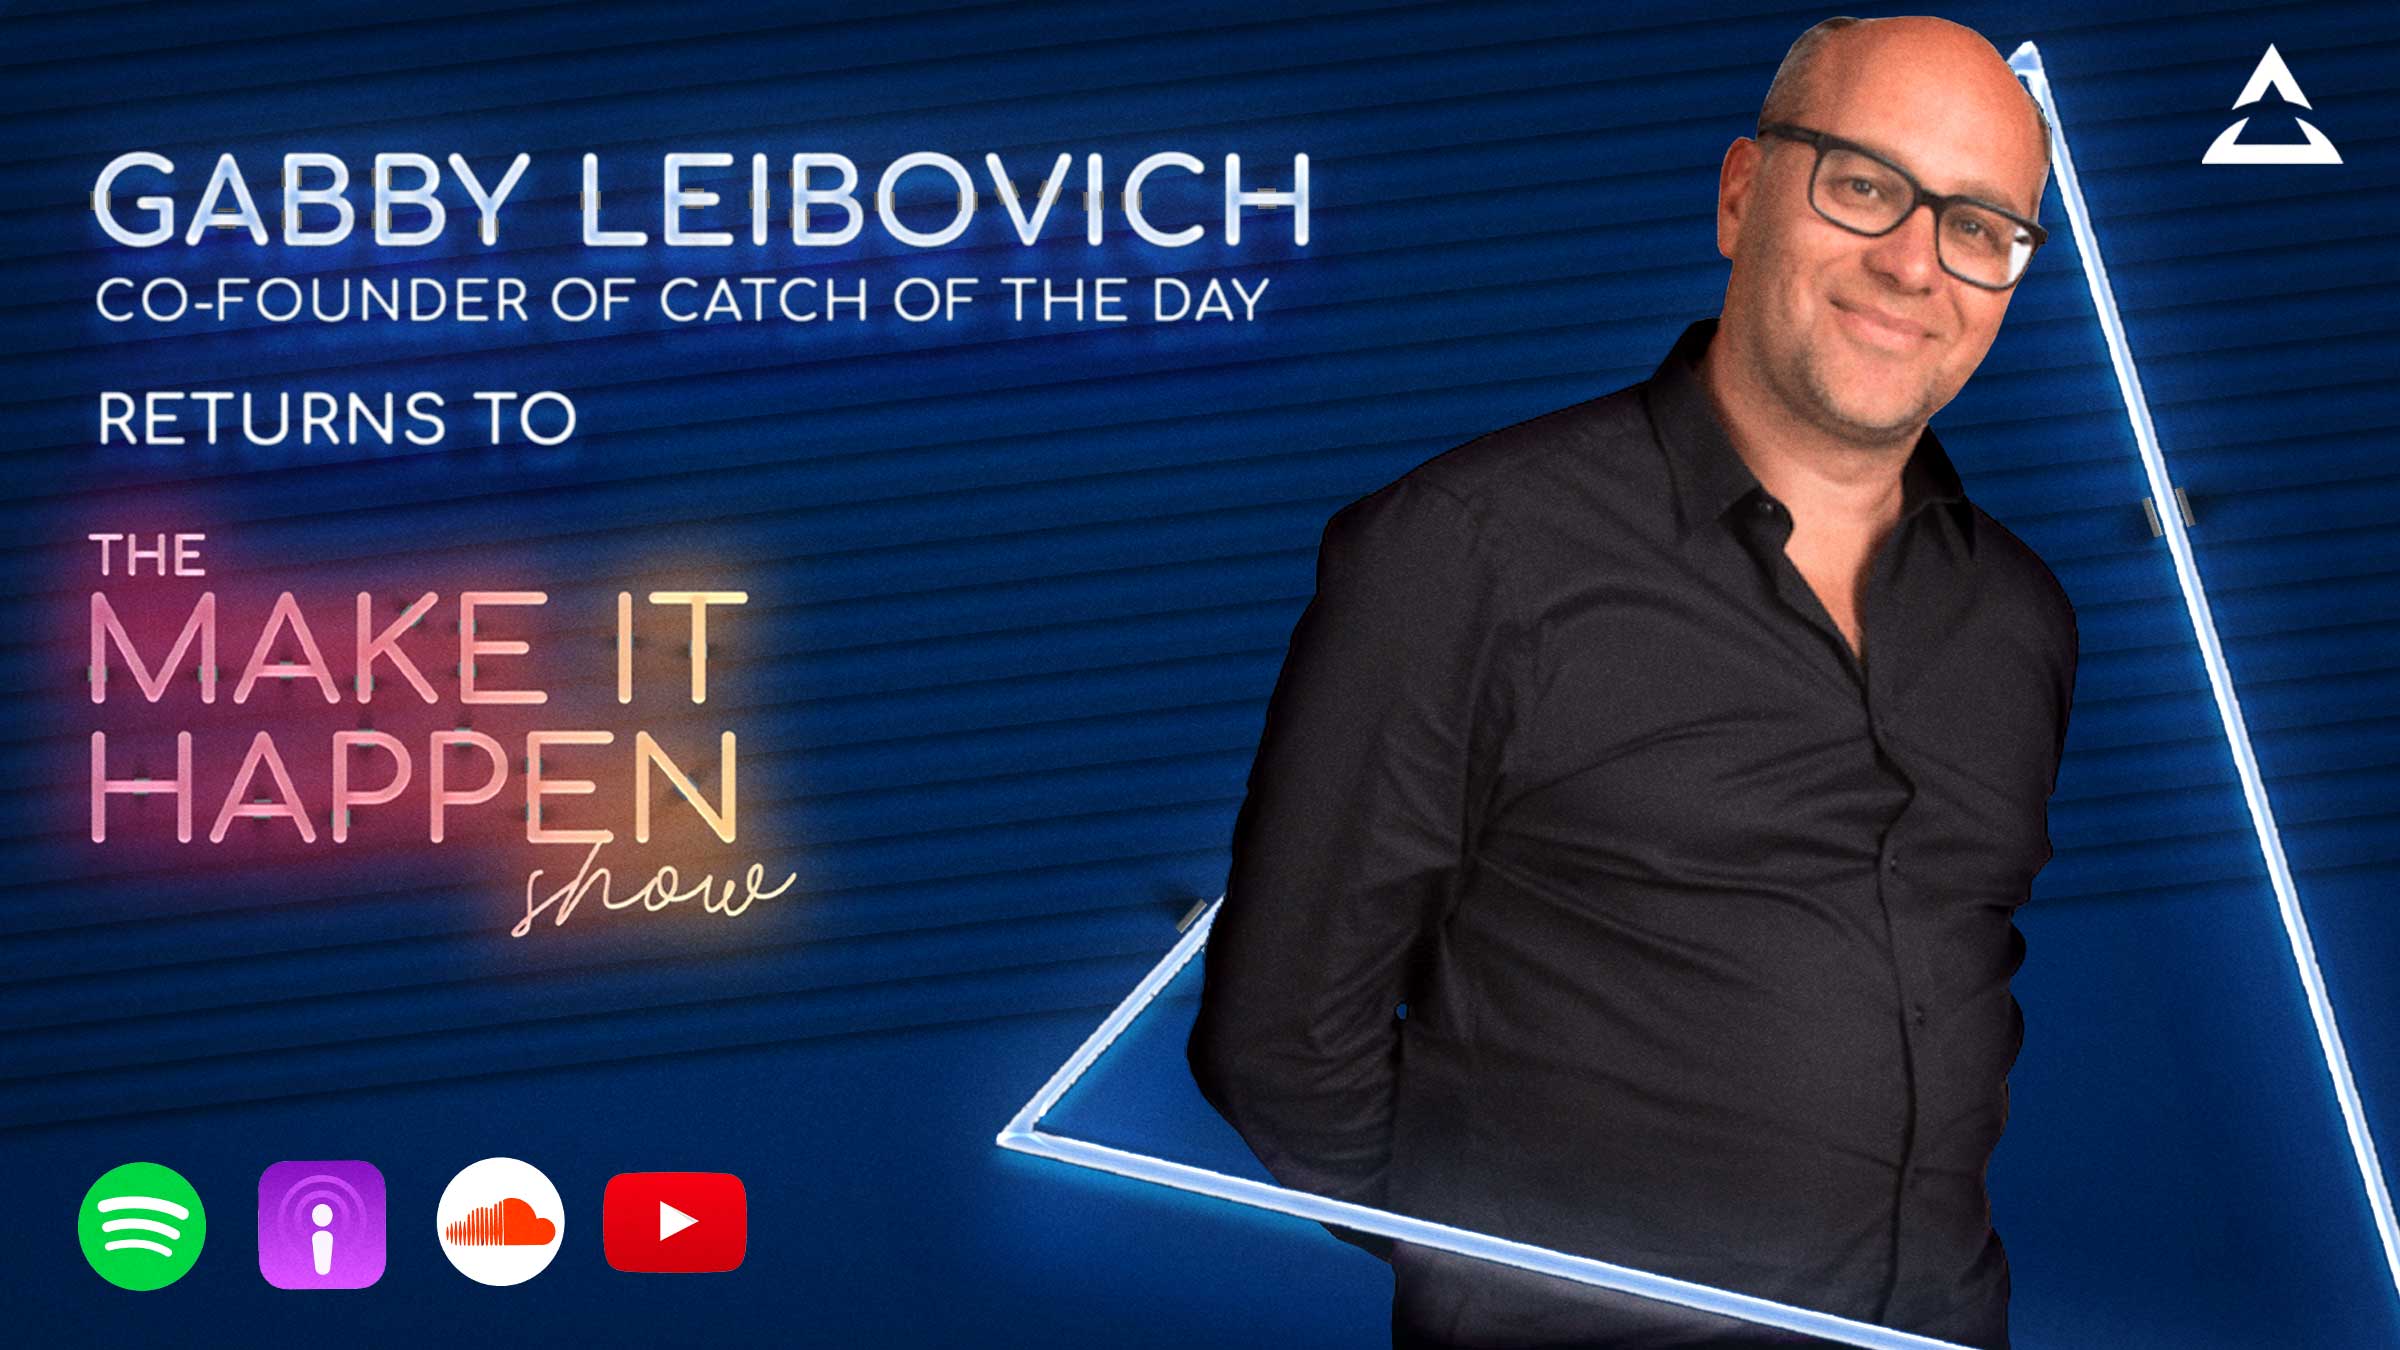 Gabby Leibovich, Co-Founder of Catch.com.au (Catch of the Day) returns to The Make It Happen Show